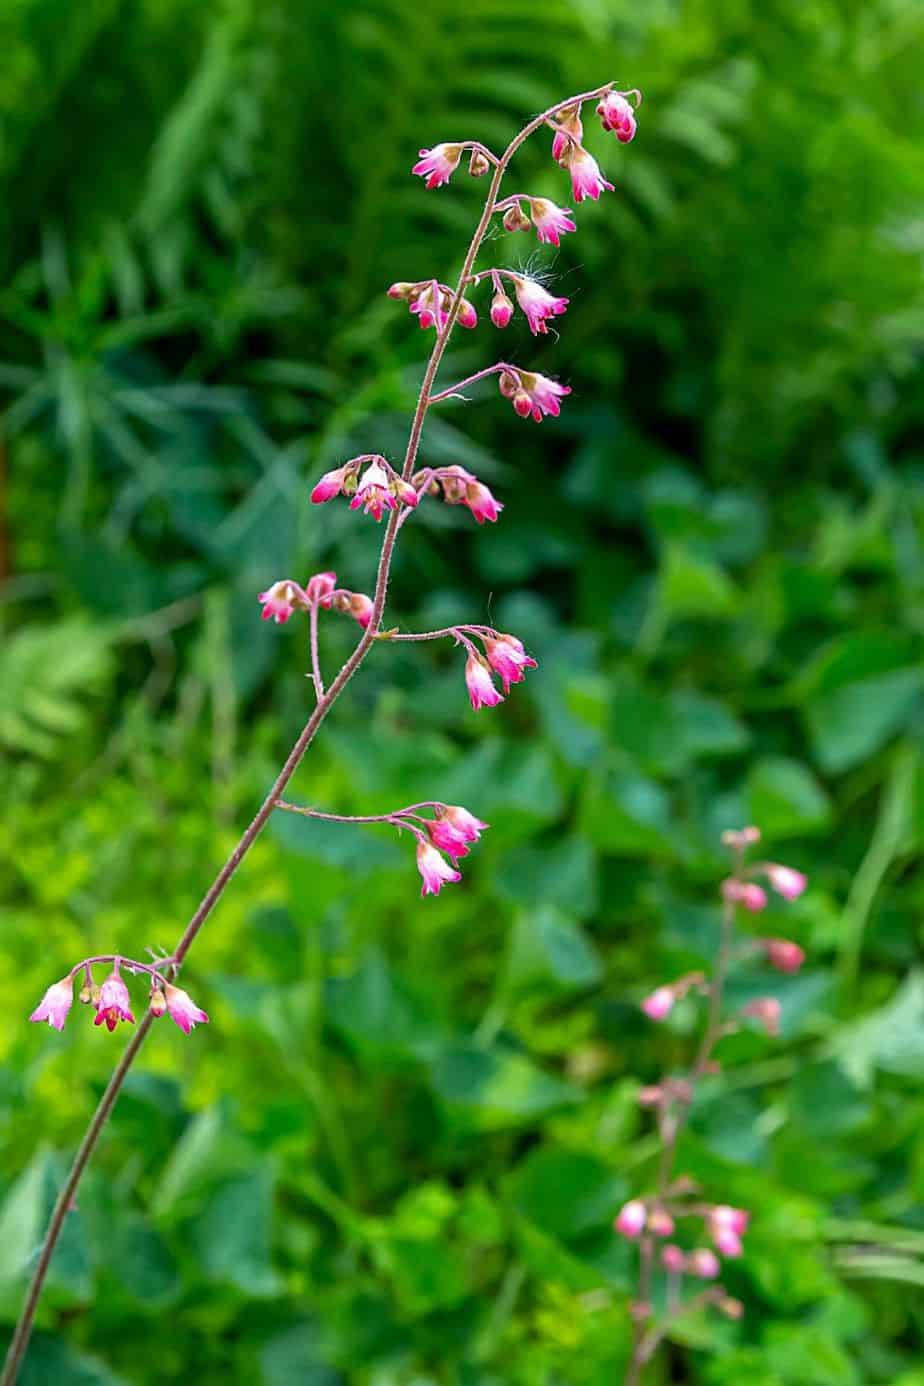 The Coral Bells' tiny blooms attract beneficial insects to your garden